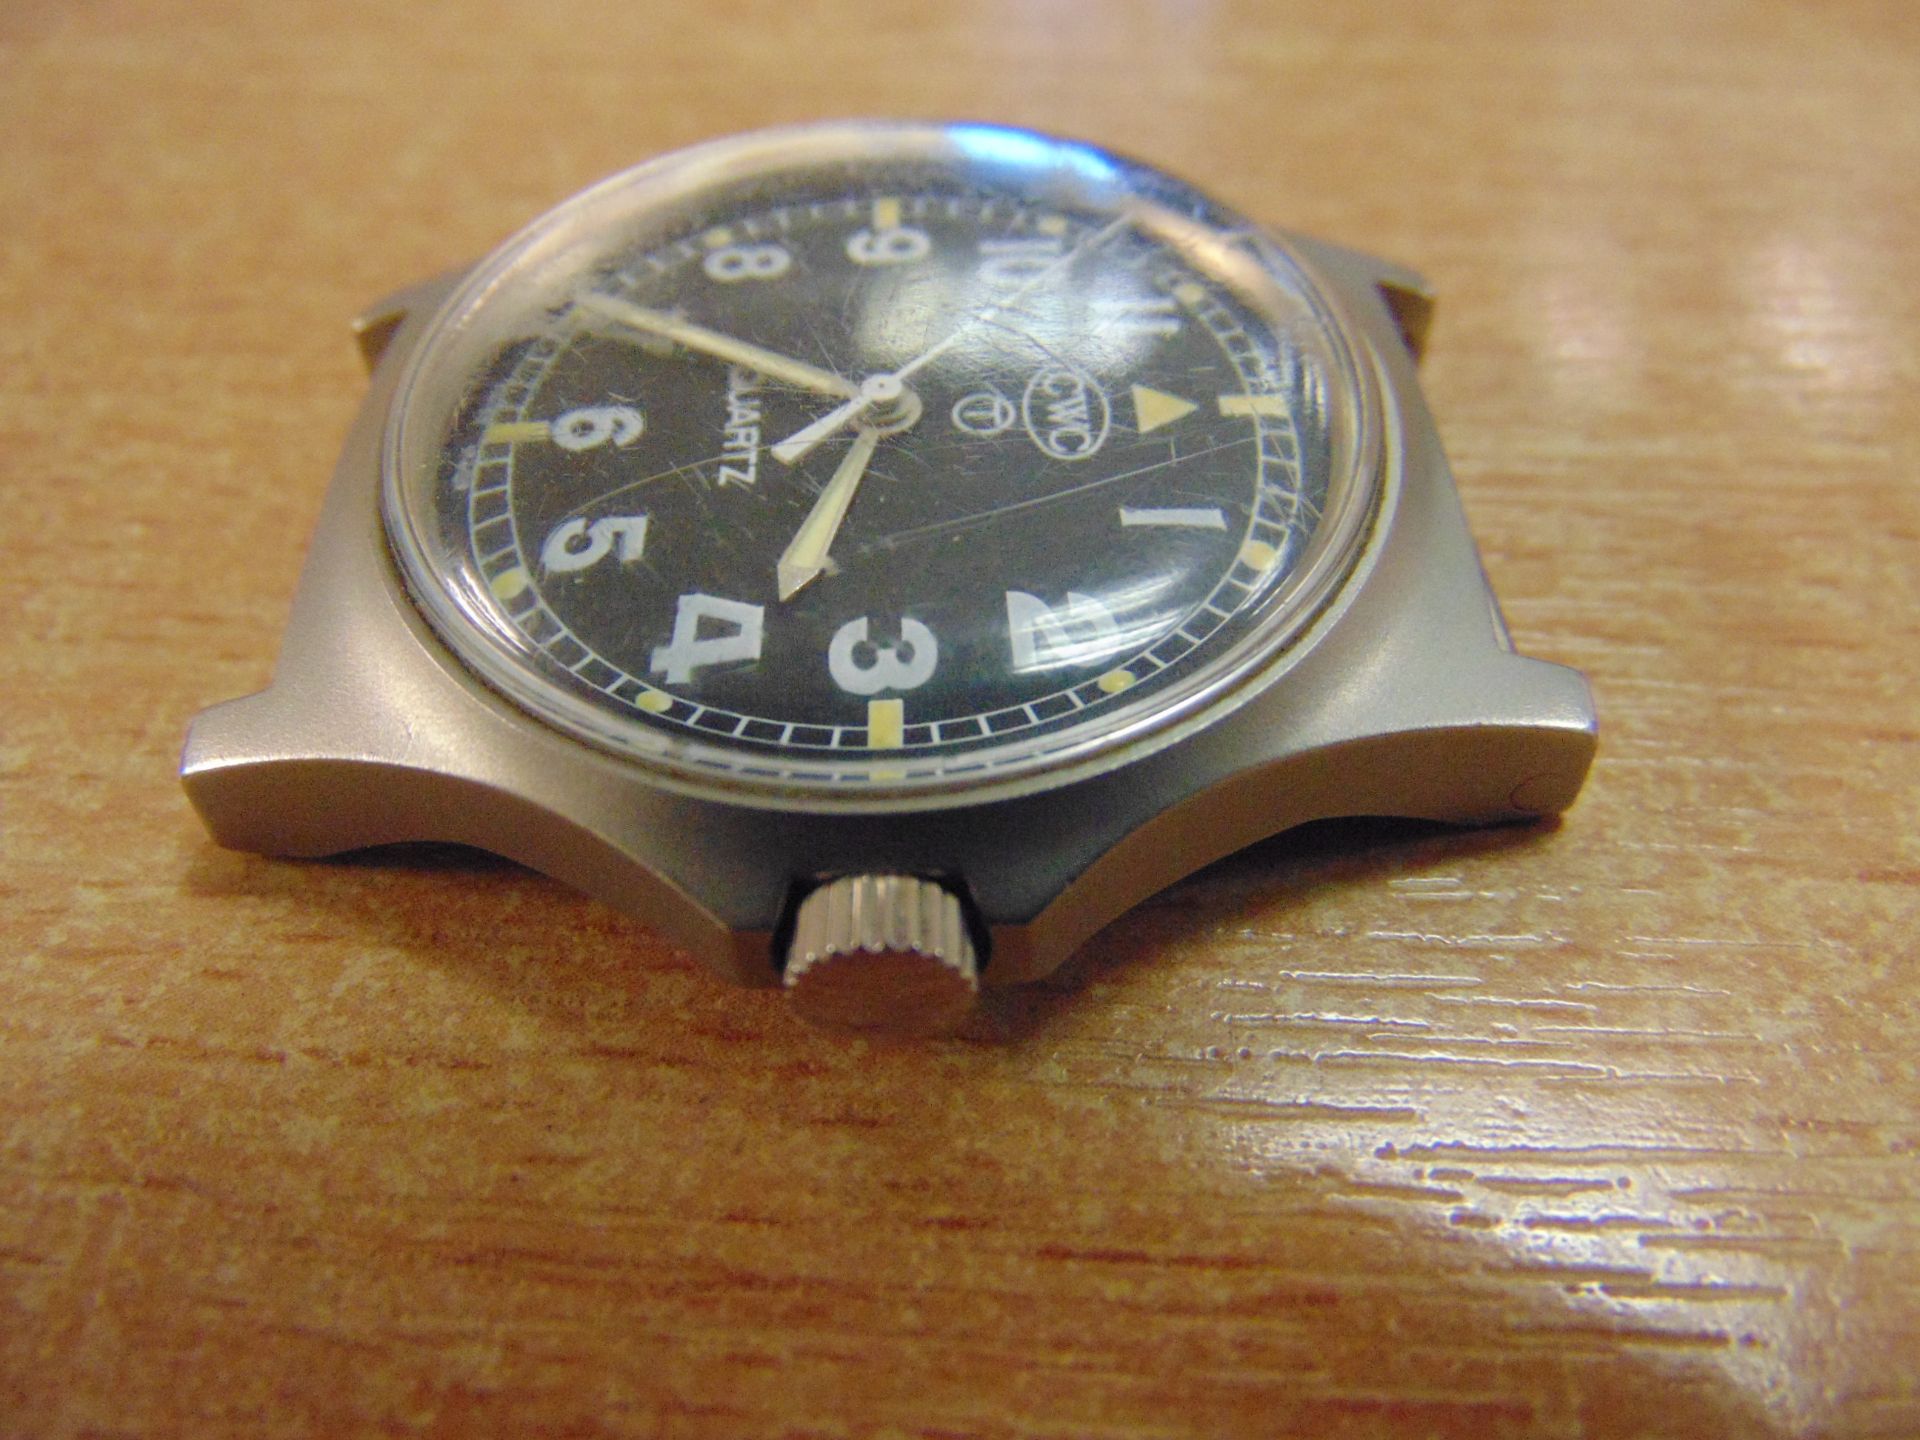 CWC W10 SERVICE WATCH WATER RESISTANT TO 5 ATM NATO MARKED DATED 2006 - Image 4 of 10